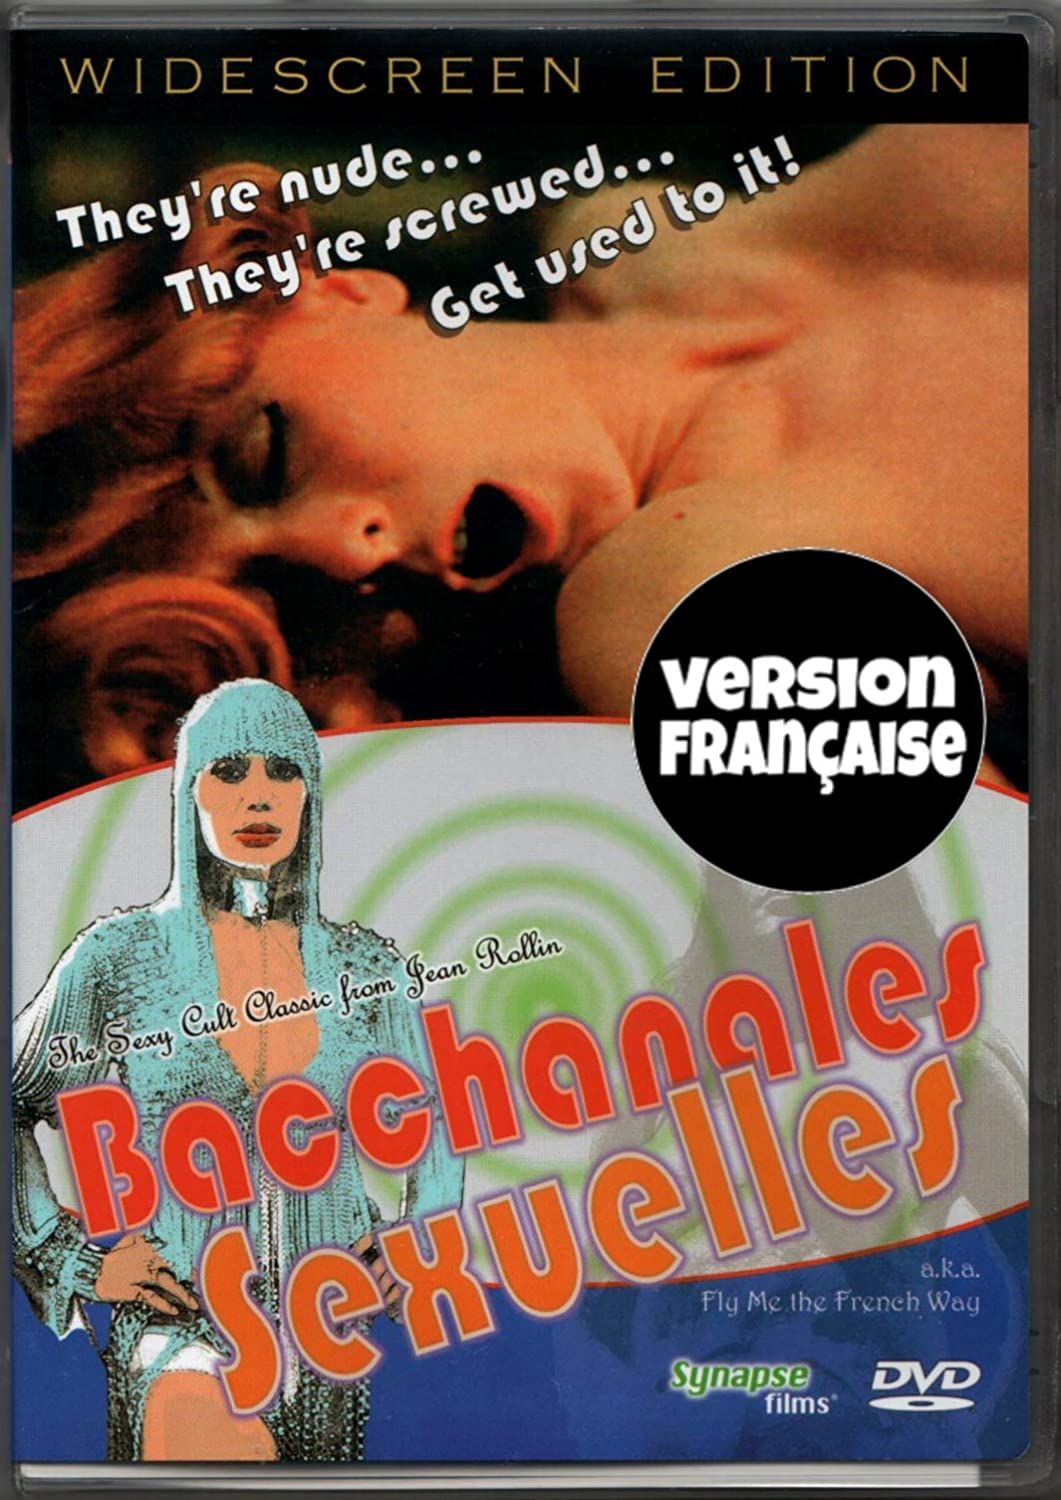 [18+] Fly Me the French Way (1974) English BluRay download full movie